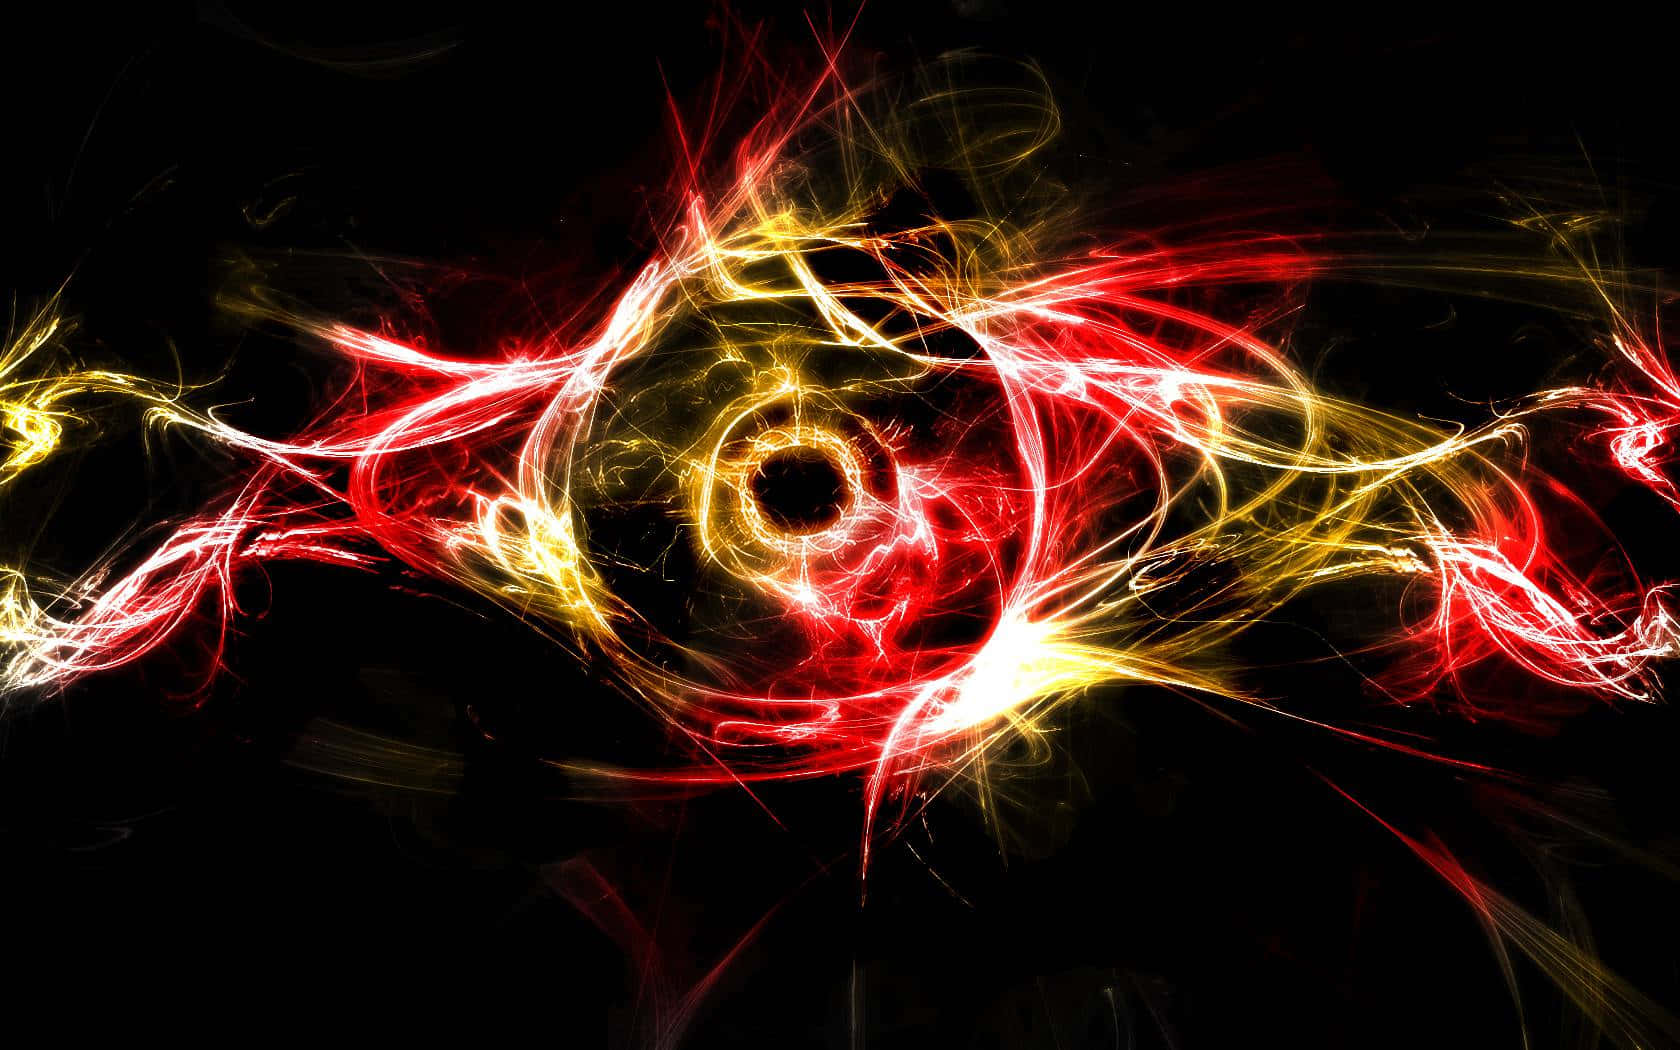 A Black Background With Red And Yellow Flames